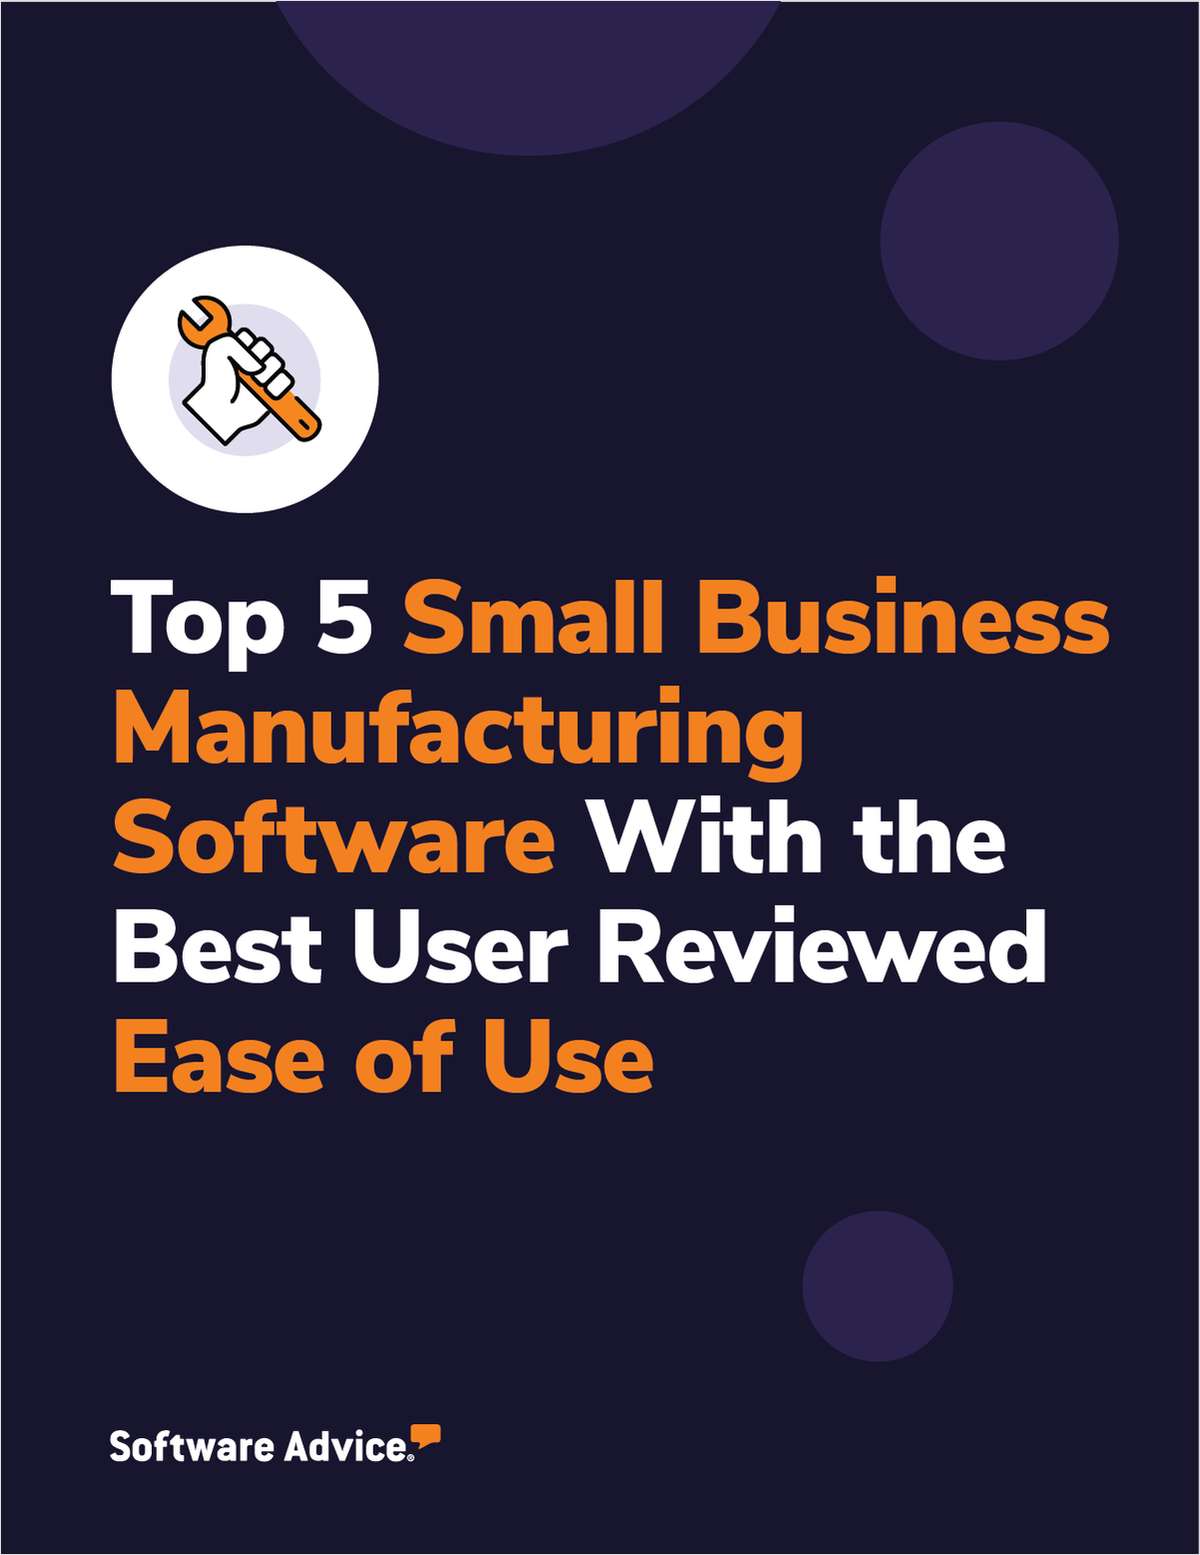 Top 5 Small Business Manufacturing Software With the Best User Reviewed Ease of Use